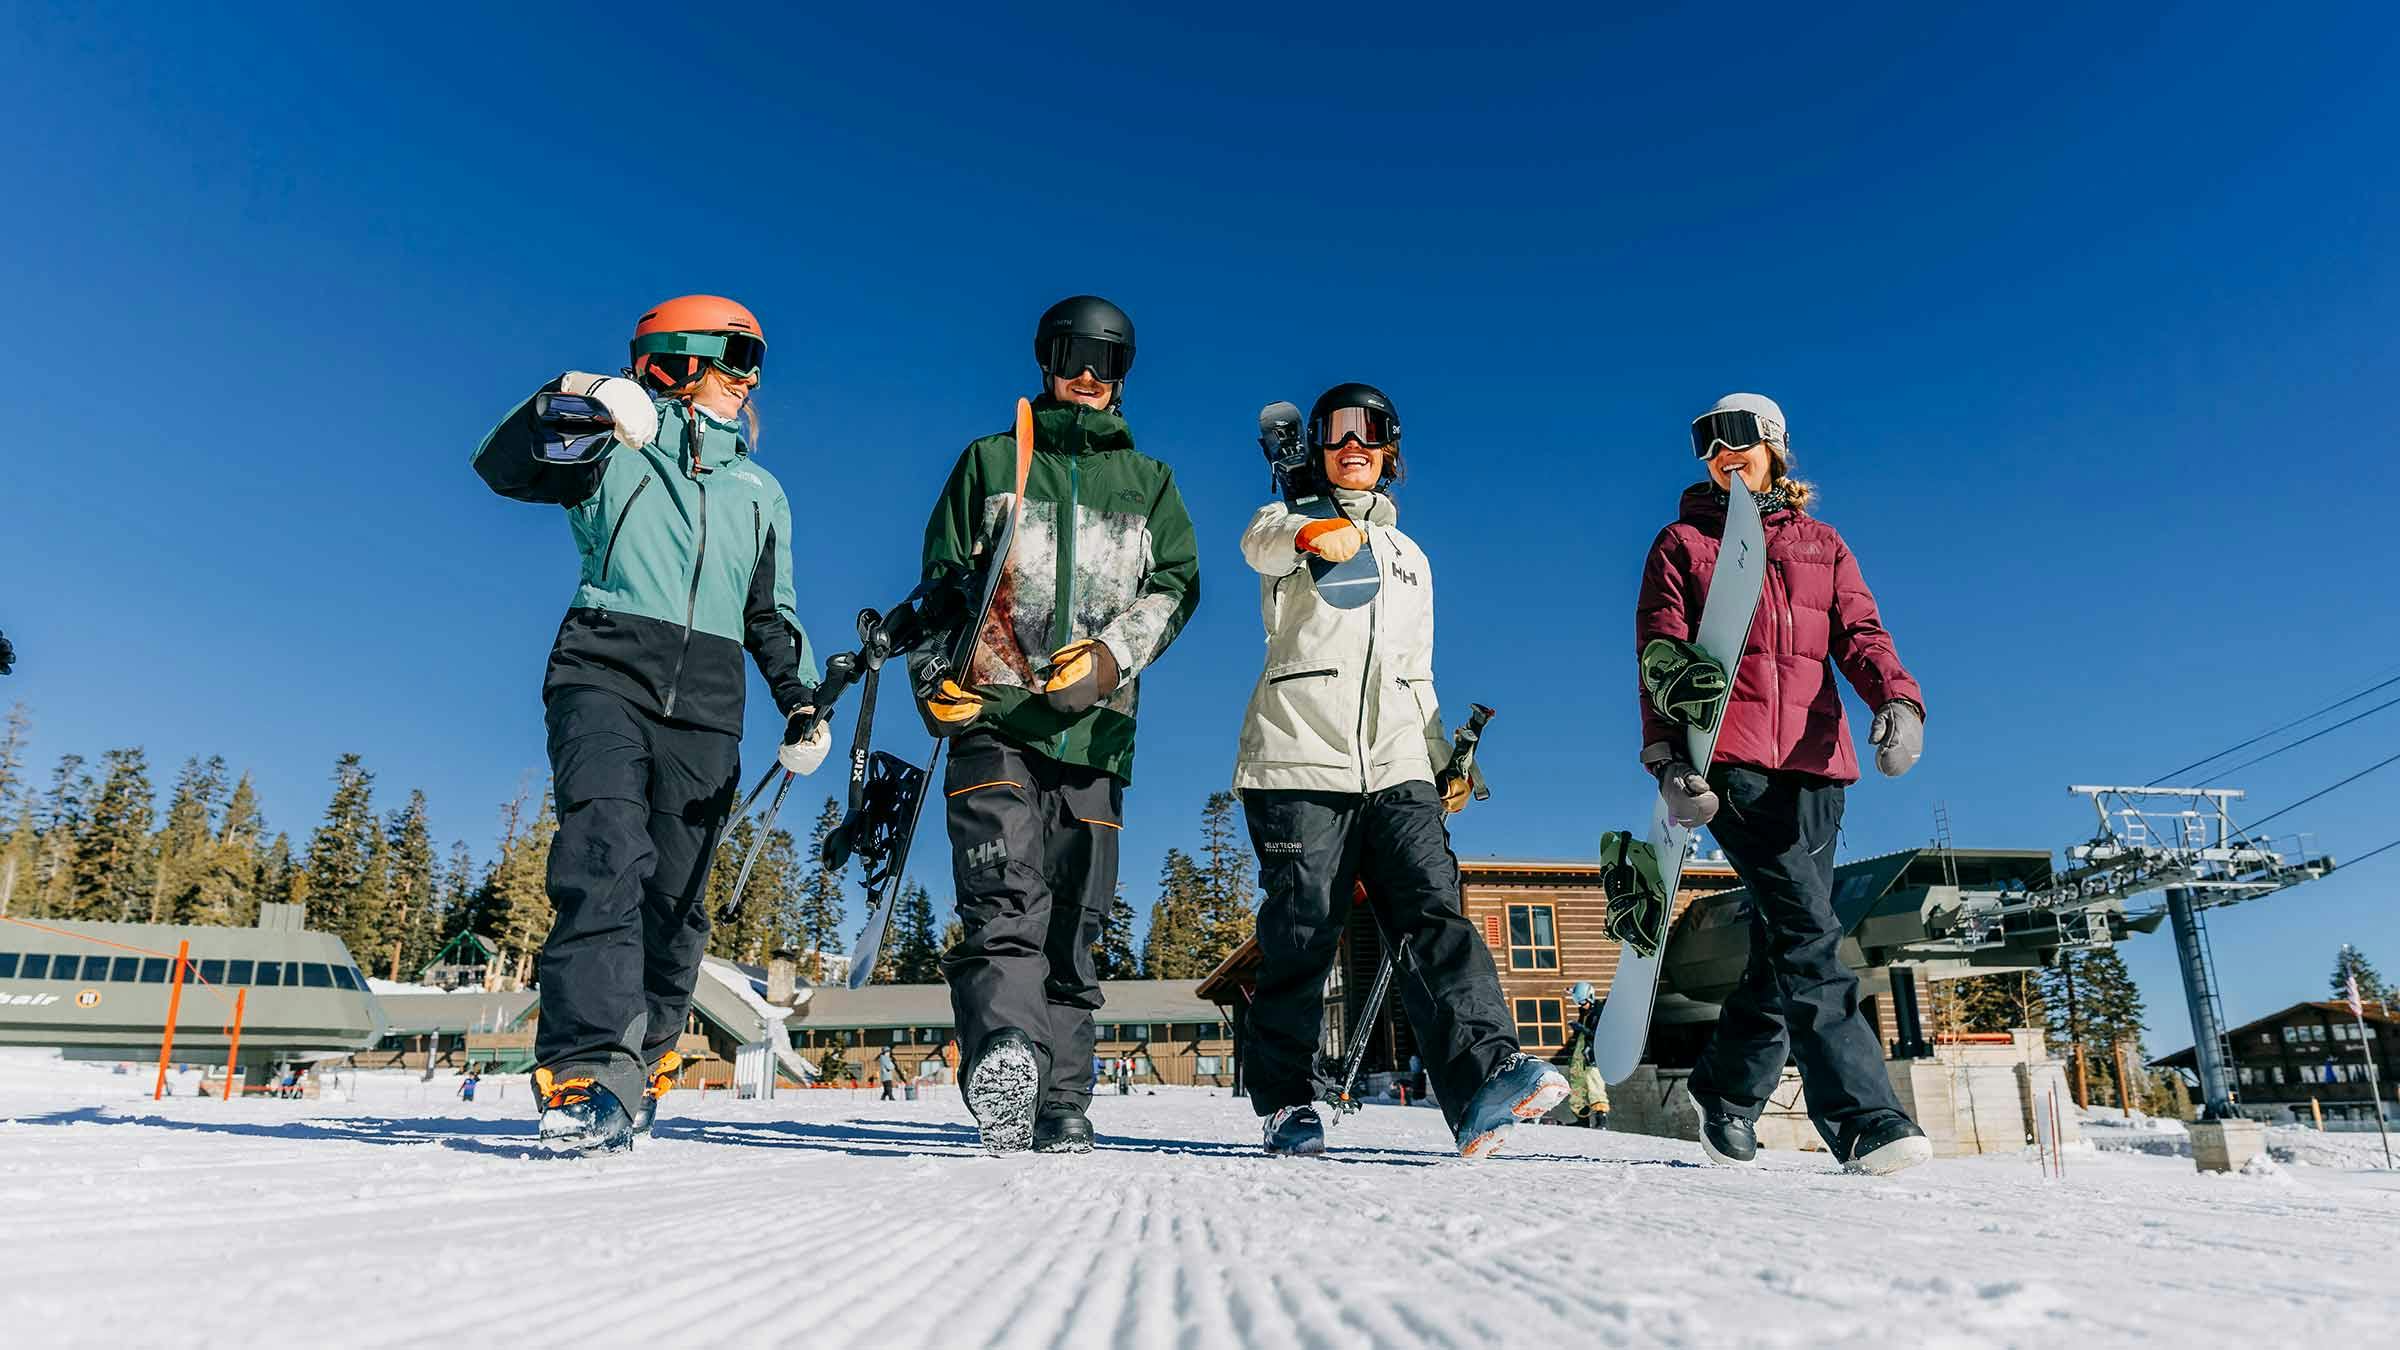 Friends walking on snow carrying their ski and snowboard gear at Mammoth Mountain.